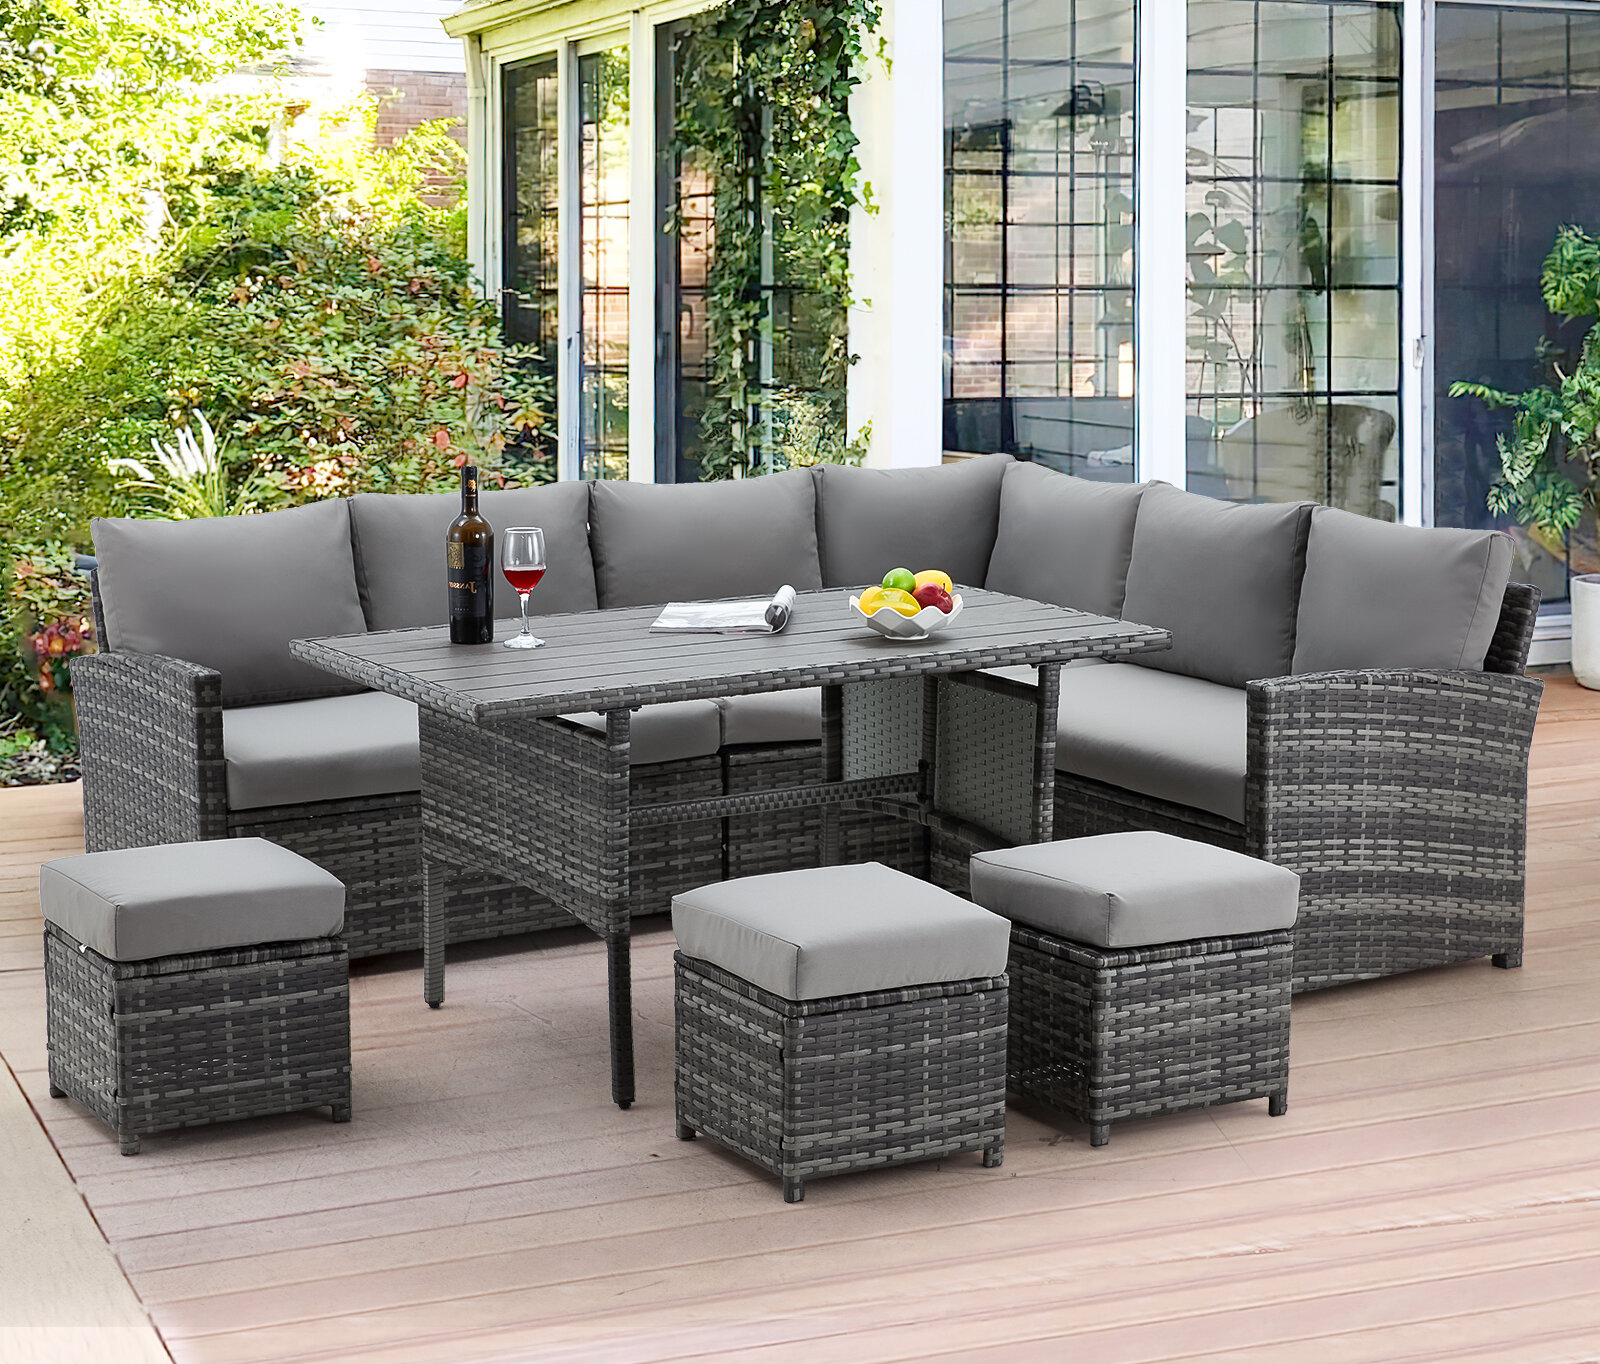 Light Brown Gray Woven 6 Rectangular Rattan dinette with a Gray Cushions,Grey